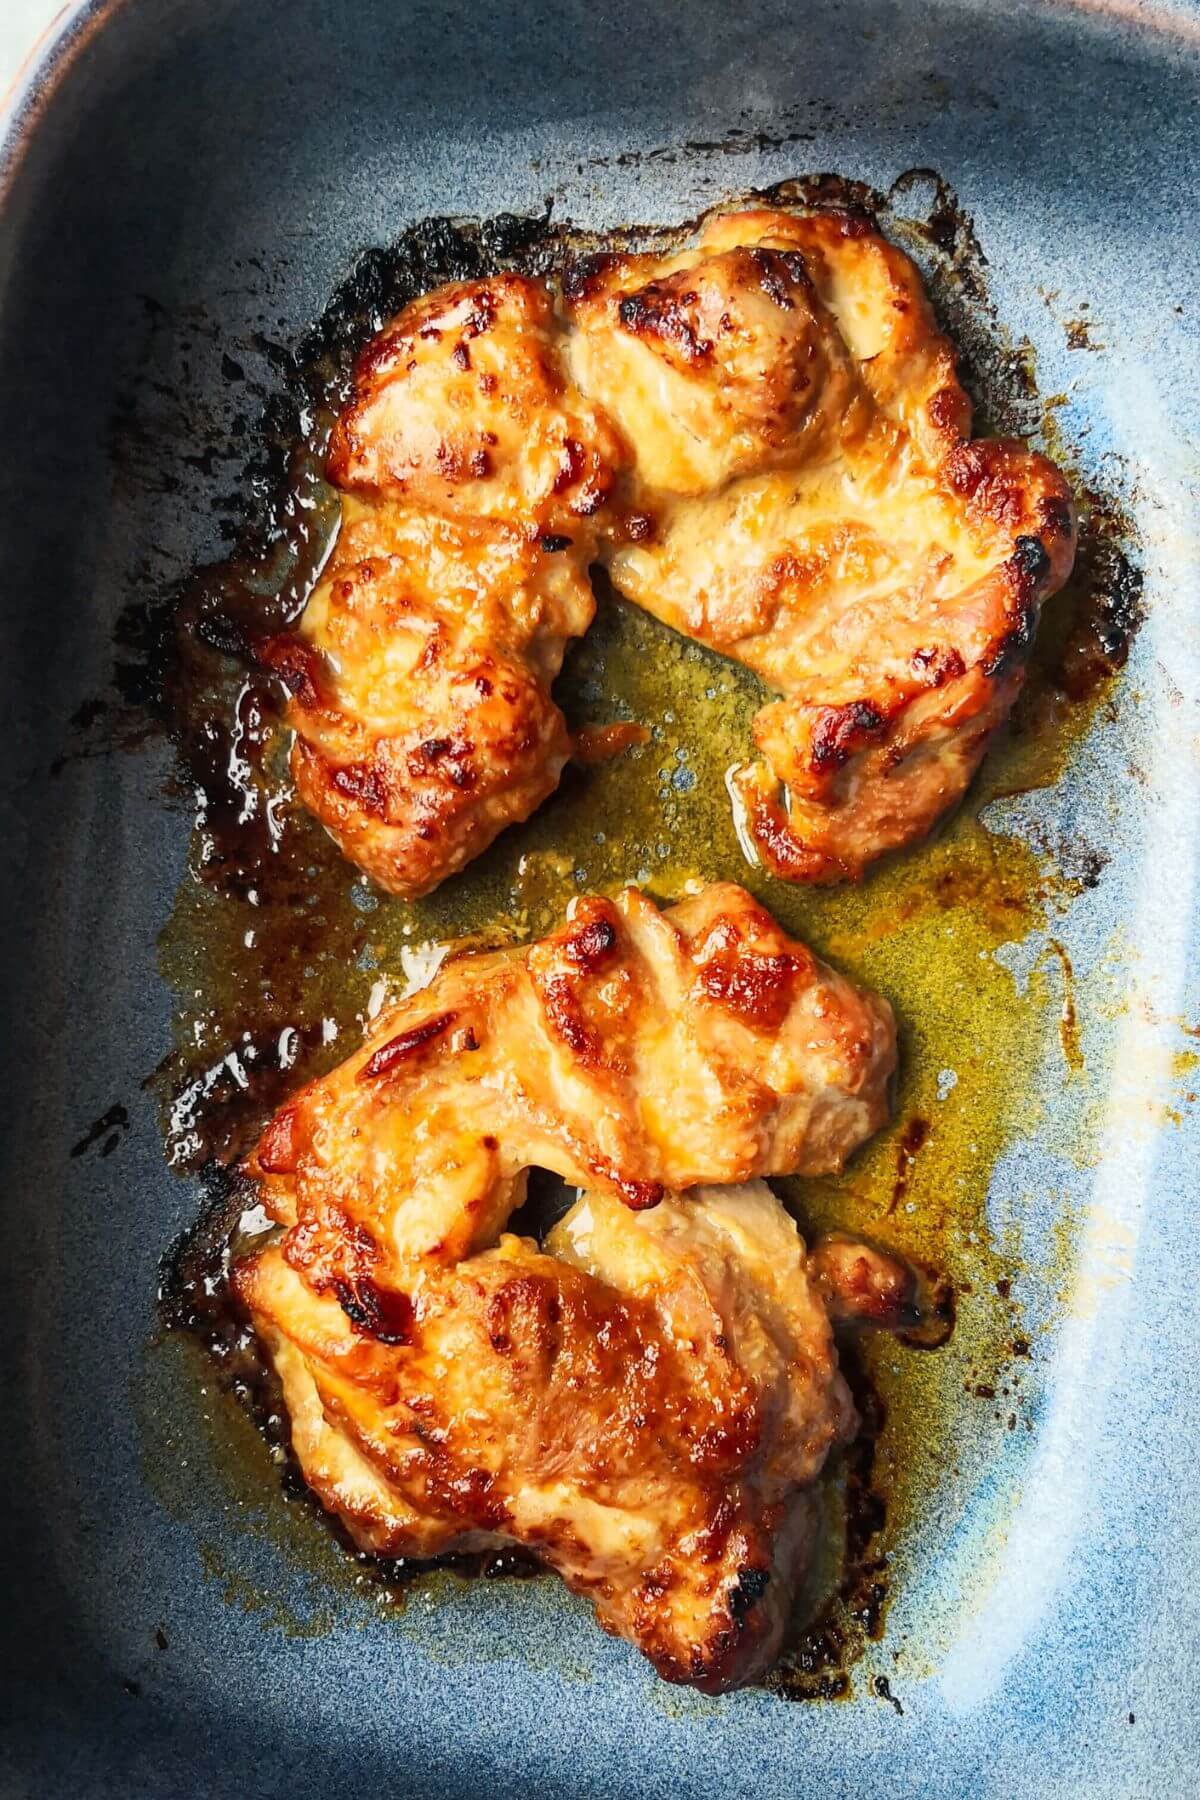 Golden and charred chicken thighs in a small blue oven dish.